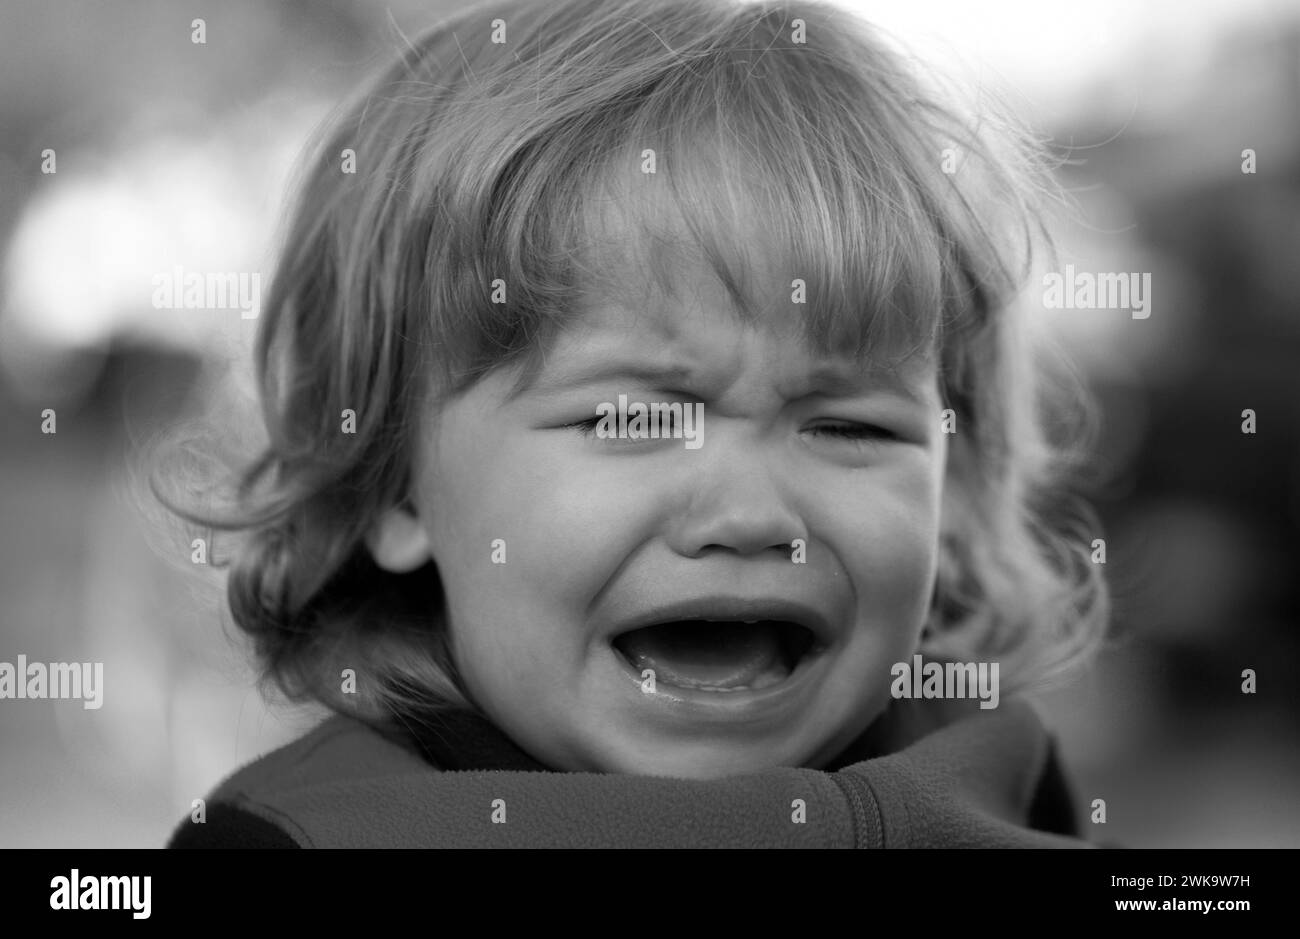 Baby cry. Close up portrait of a crying kid. Stock Photo